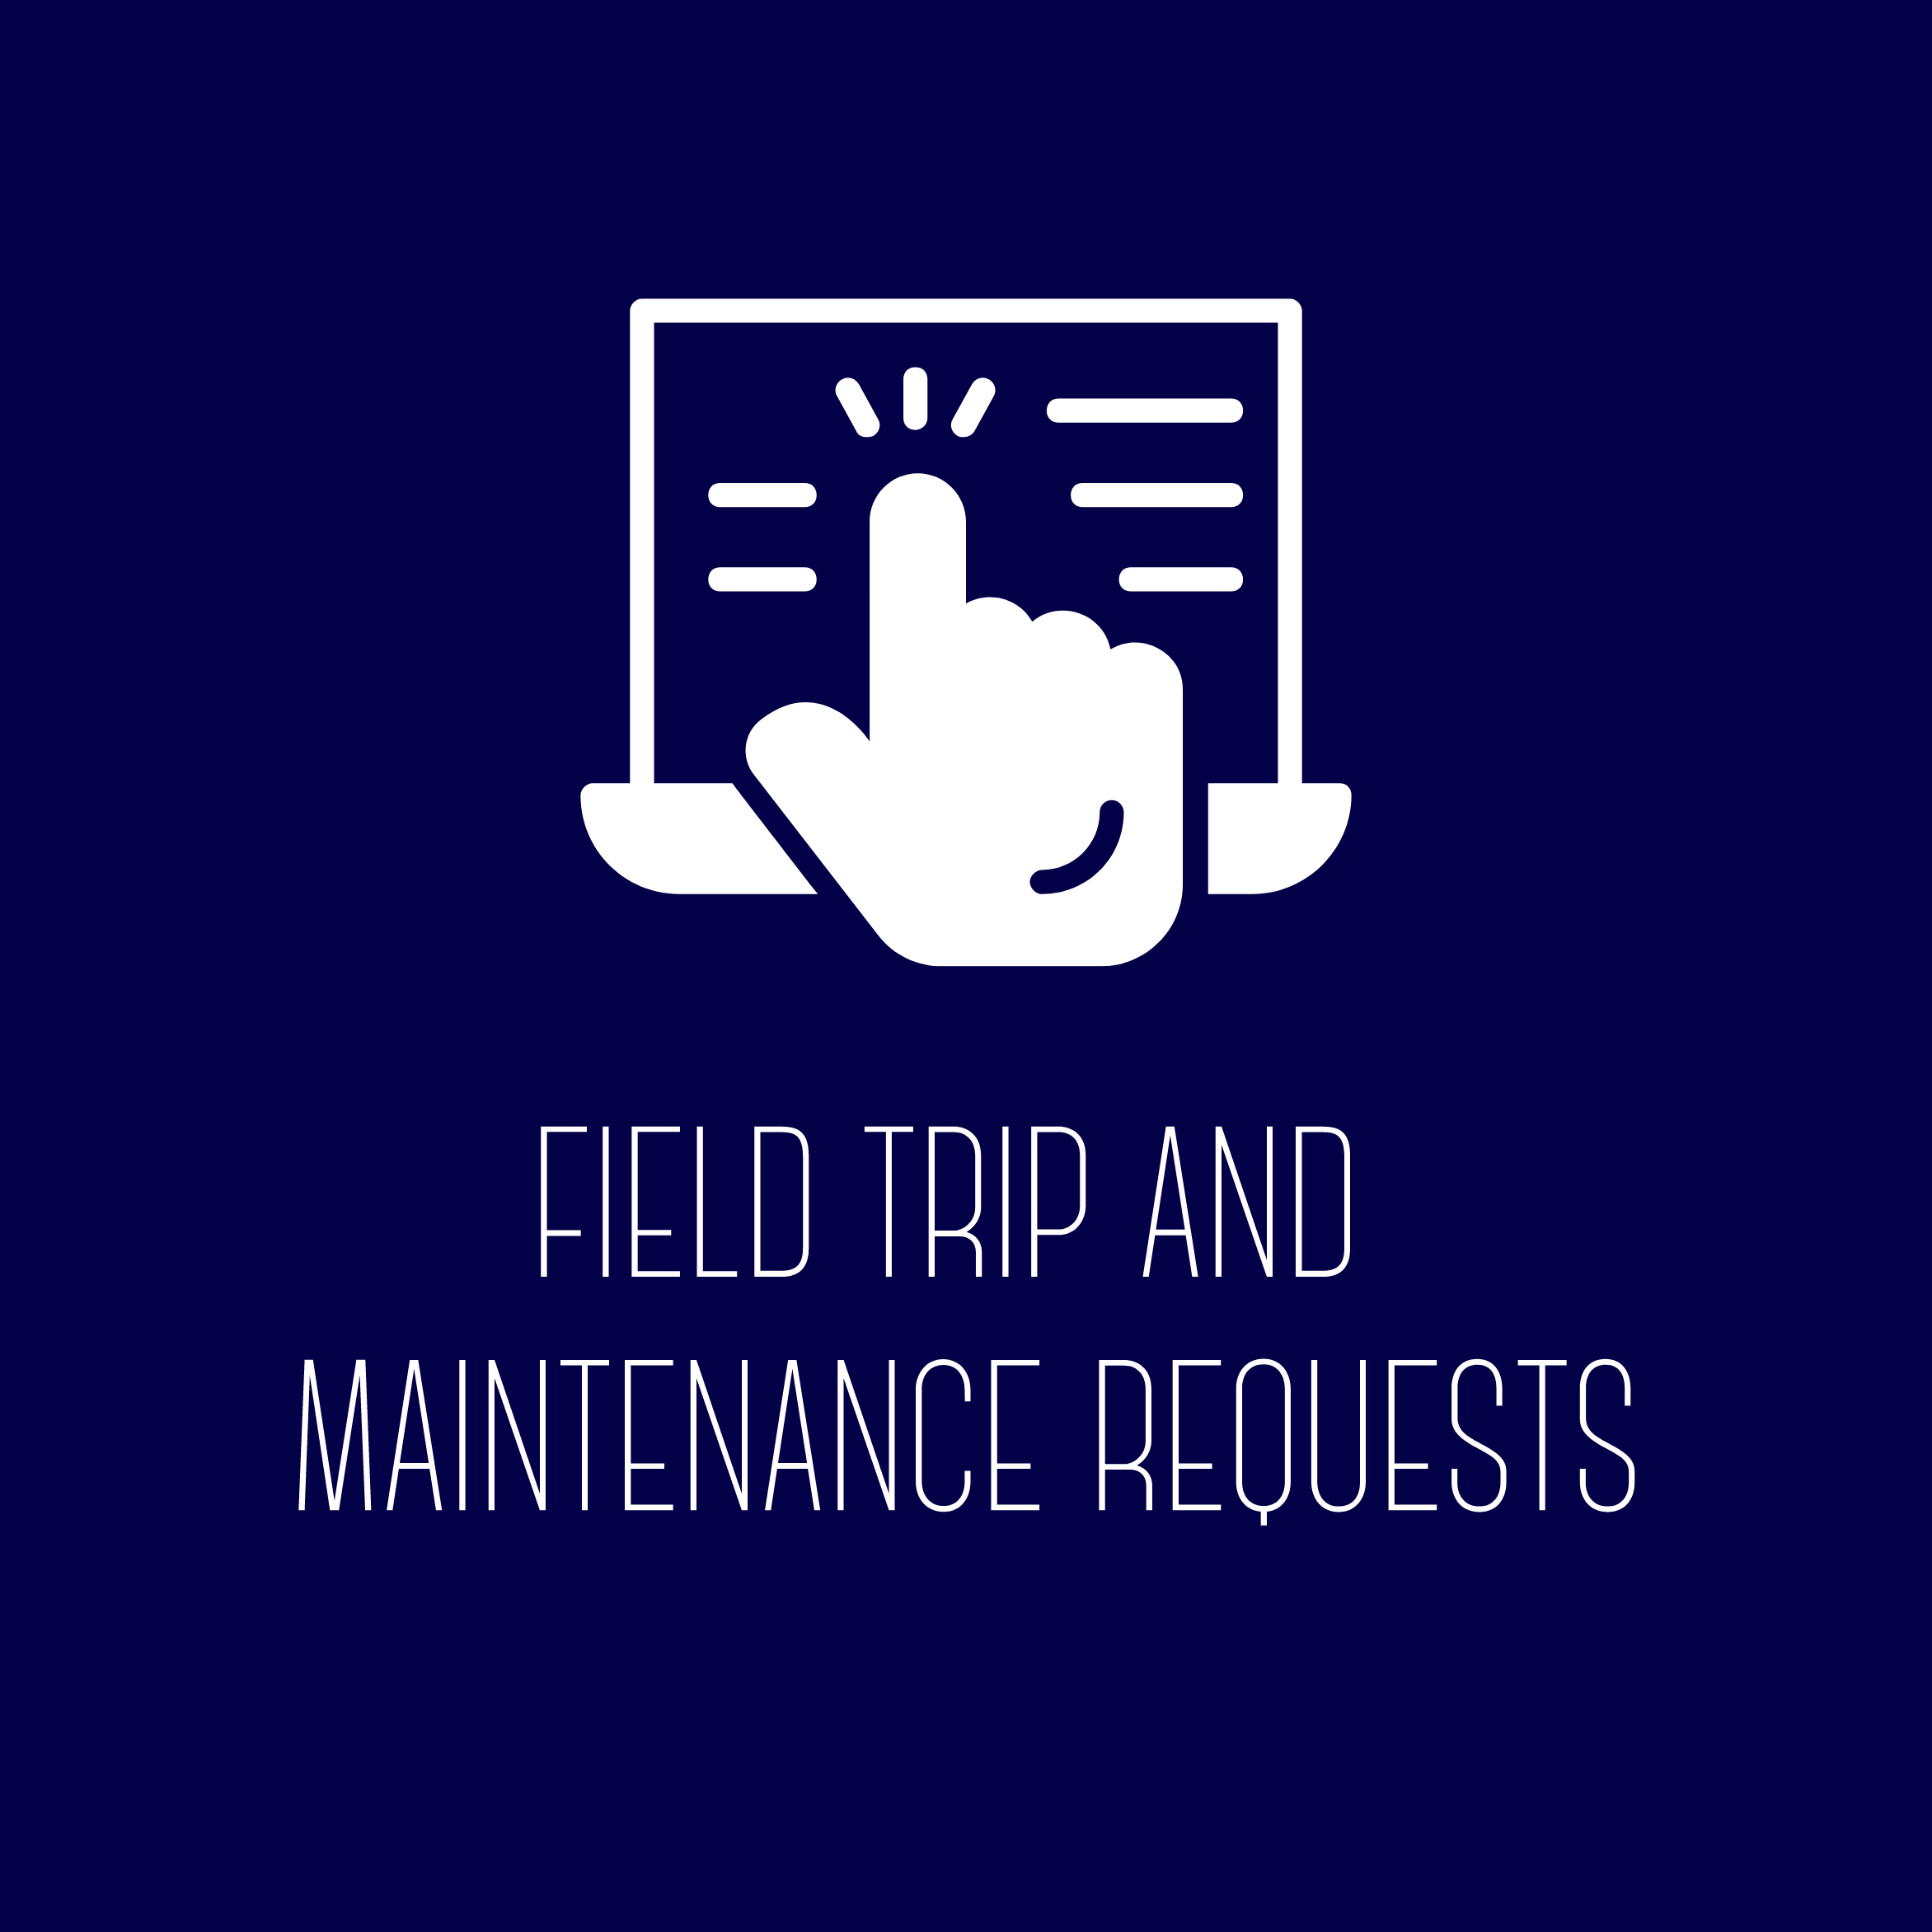 Field Trip and Maintenance Requests